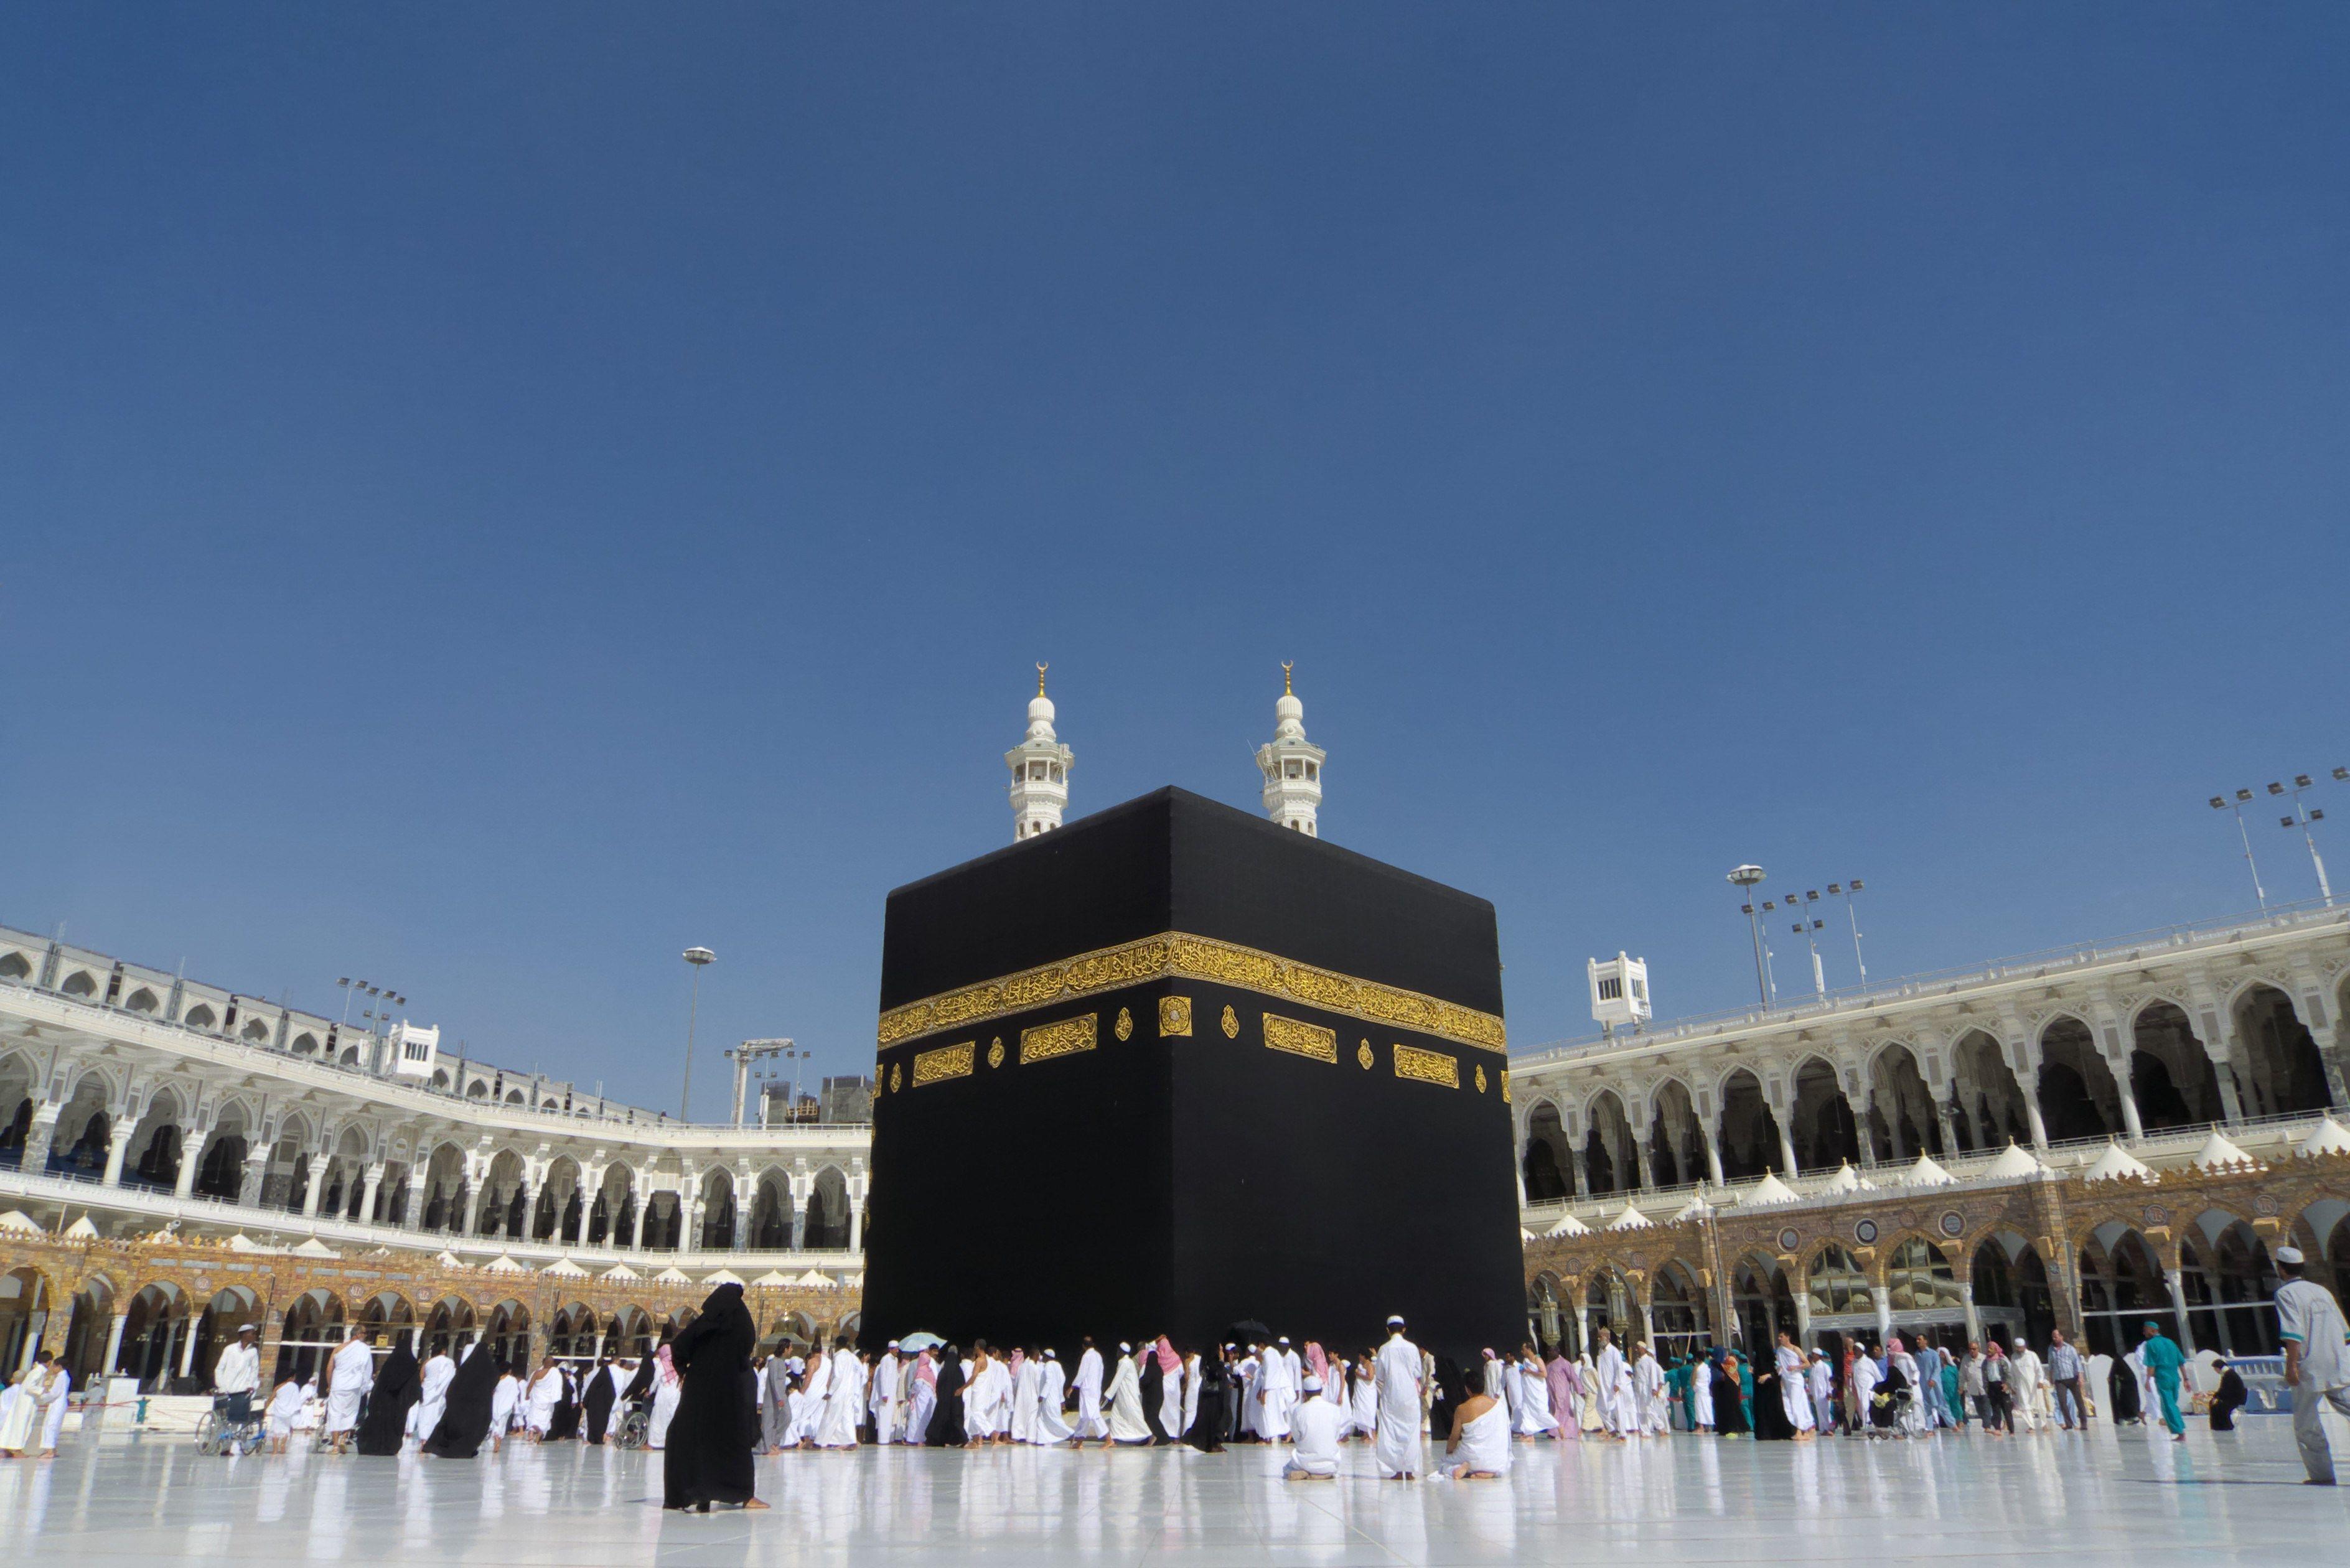 Building Analysis  The Kaaba  Islamic Architecture by Dxx